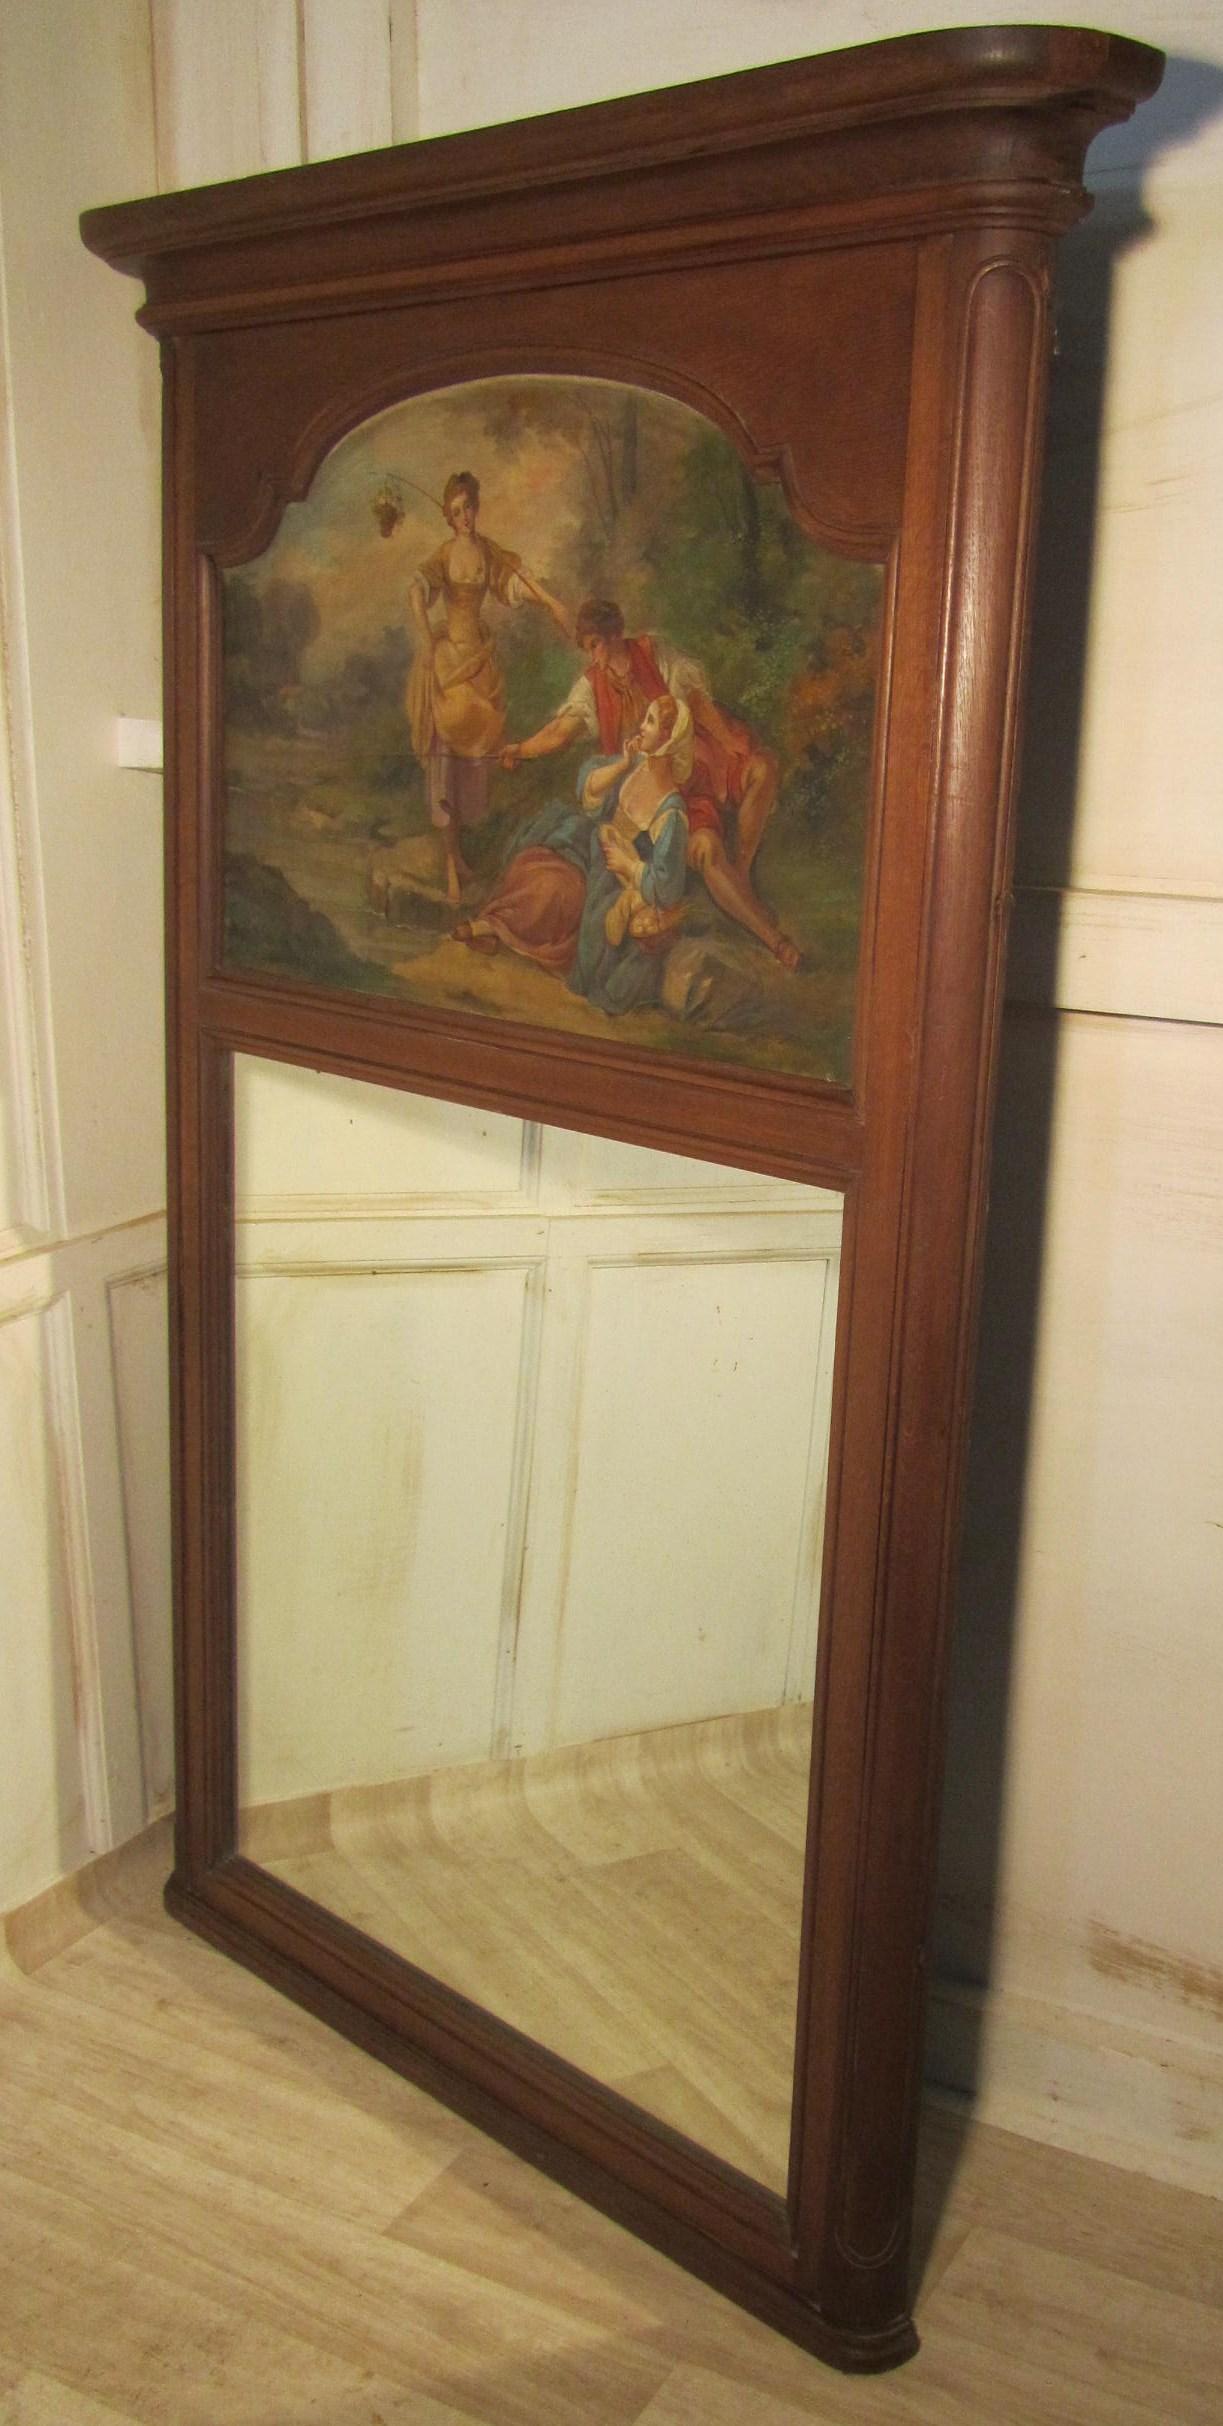 A large 19th century French oak trumeau mirror, oil on canvas

19th century oil on canvas set with a wall mirror in an oak frame, the unsigned painting is superbly executed it depicts three young people fishing and enjoying the countryside and